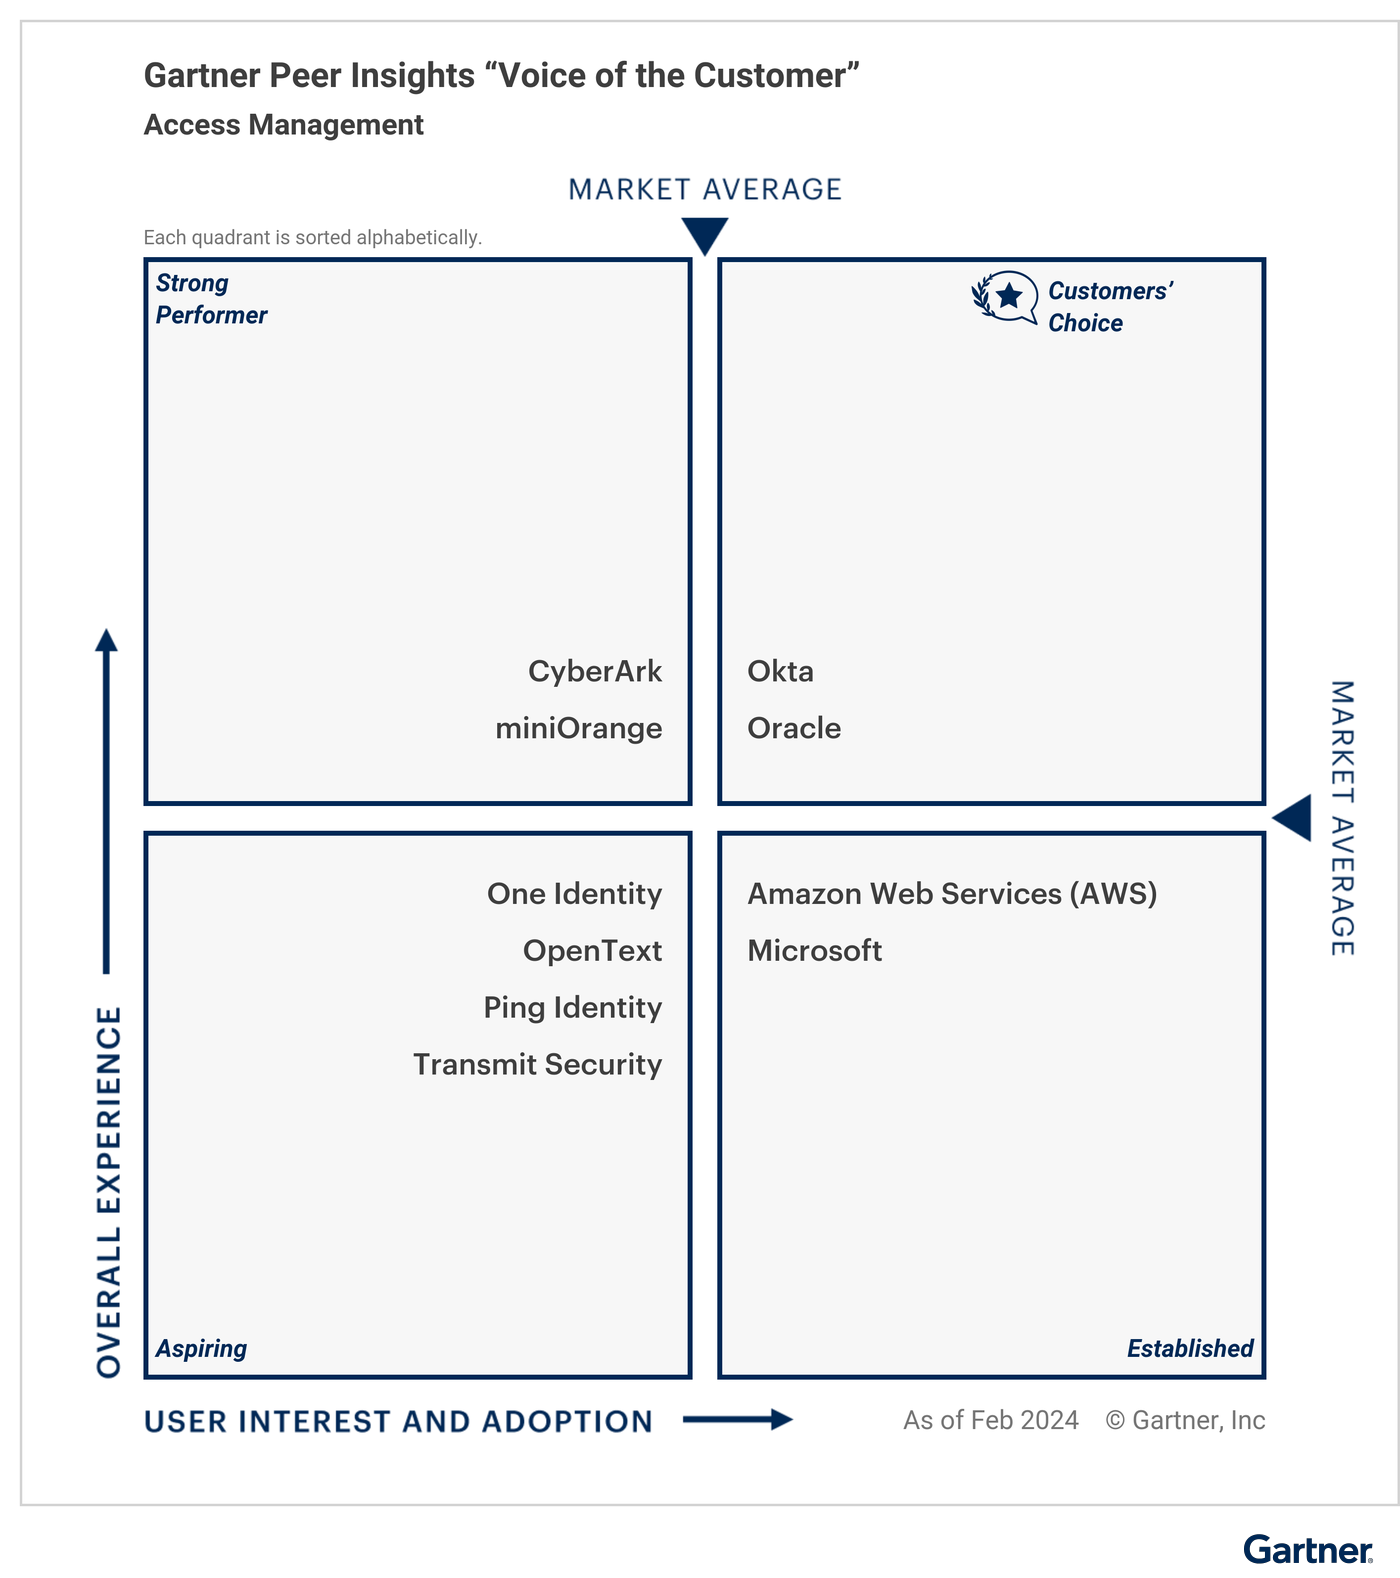 All-vendors-are-classified-under-specific-quadrants-based-on-their-“overall-experience”-and-“user-interest-and-adoption-”--“Customers’-Choice”-quadrant-represents-the-highest-overall-experience